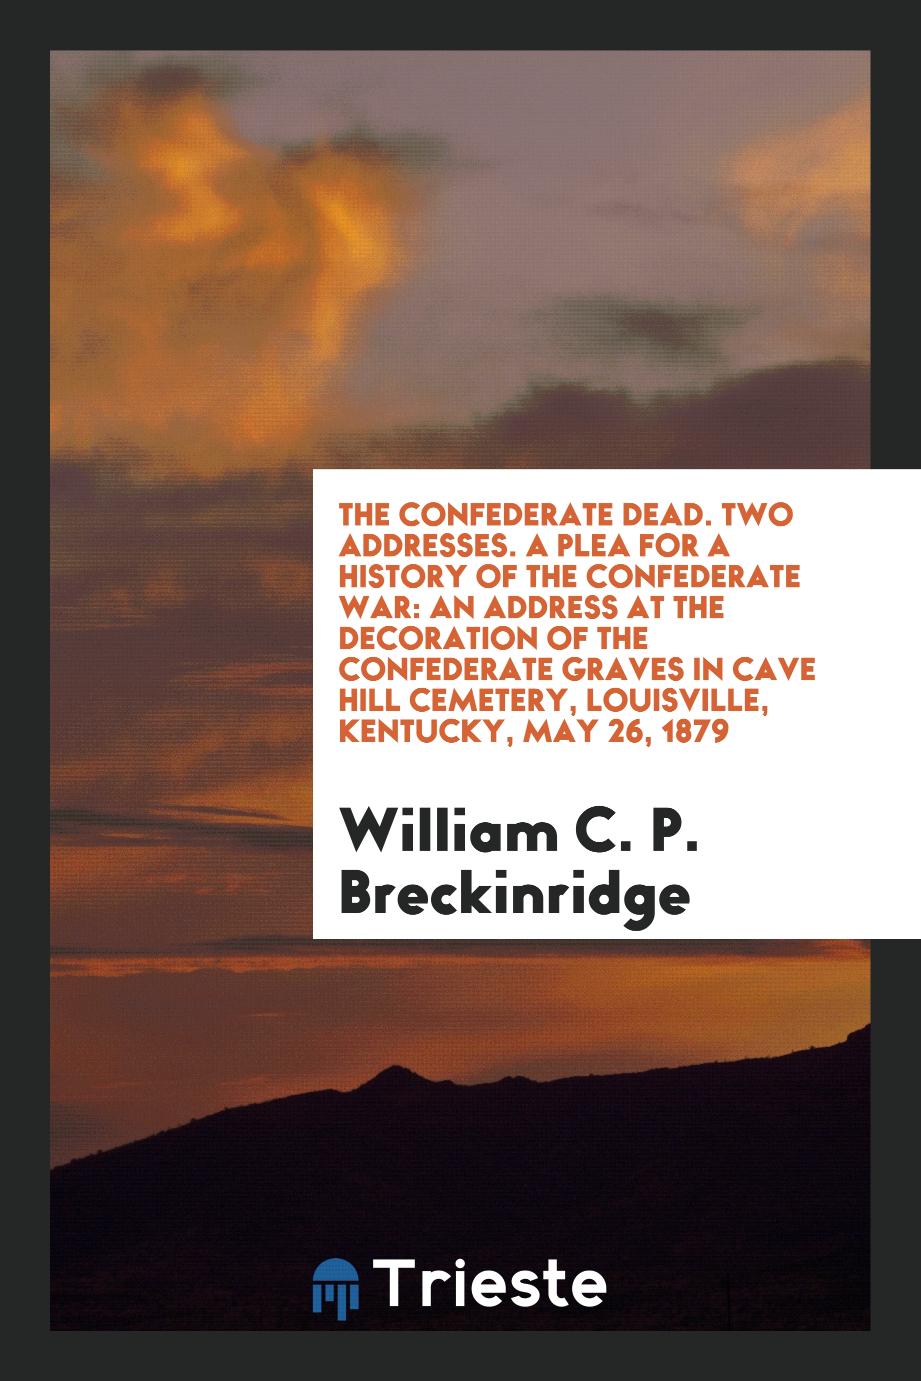 The Confederate Dead. Two Addresses. A Plea for a History of the Confederate War: An Address at the Decoration of the Confederate Graves in Cave Hill Cemetery, Louisville, Kentucky, May 26, 1879